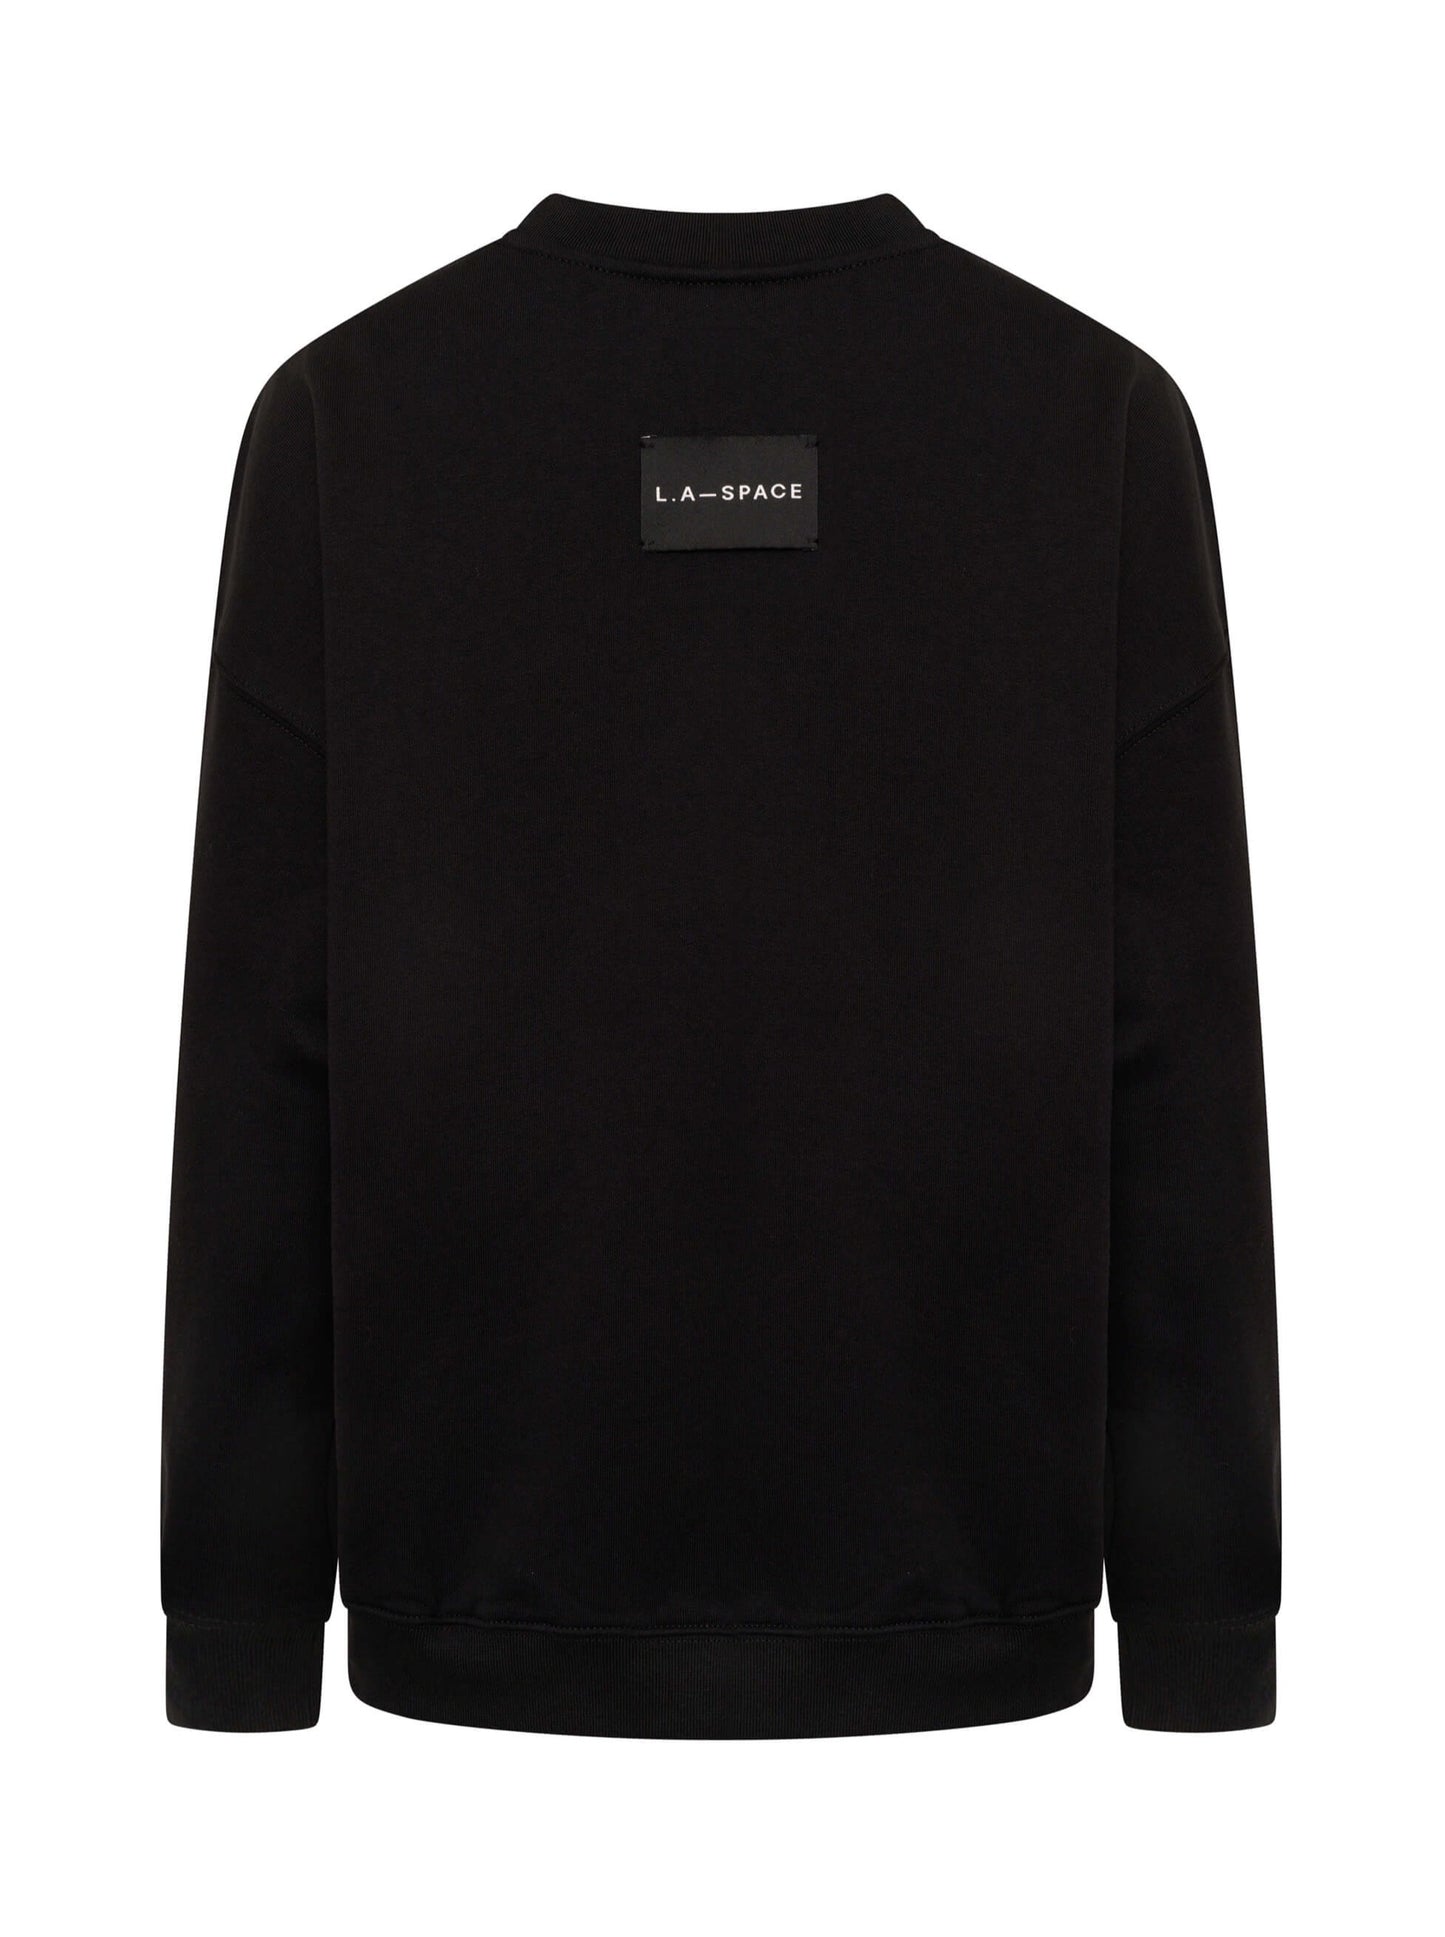 'YOUR SPACE OR MINE' EMBROIDERED SWEATSHIRT BLACK